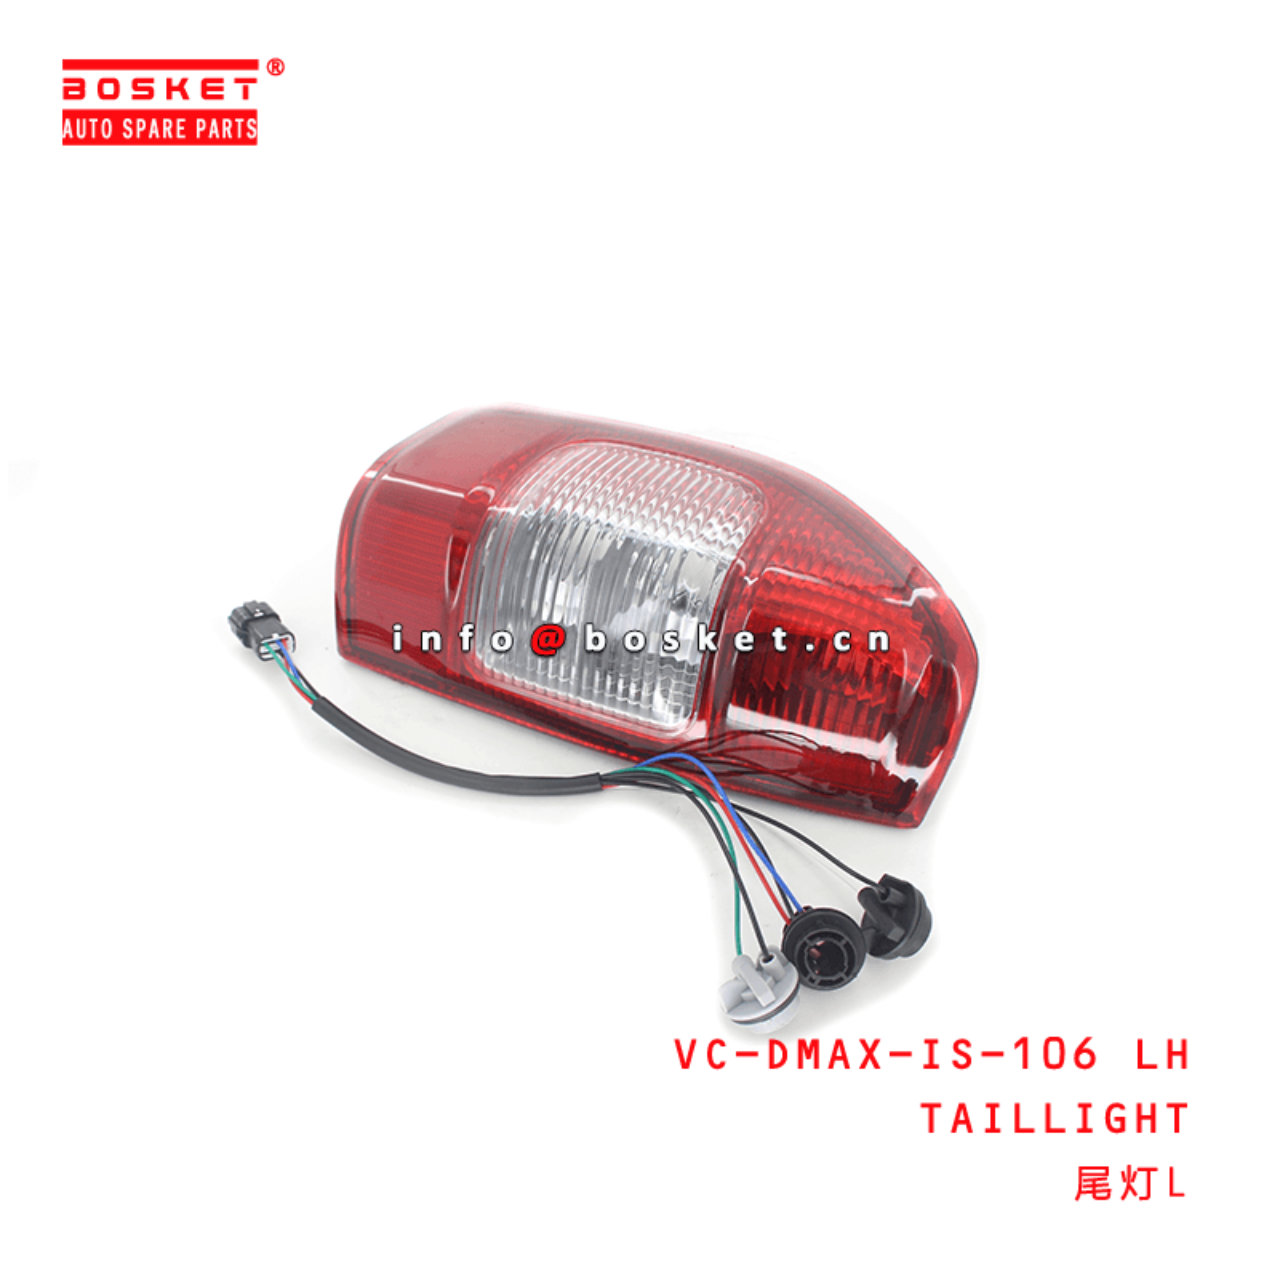  VC-DMAX-IS-106 LH Taillight Suitable for ISUZU D-MAX 02-05 06-08